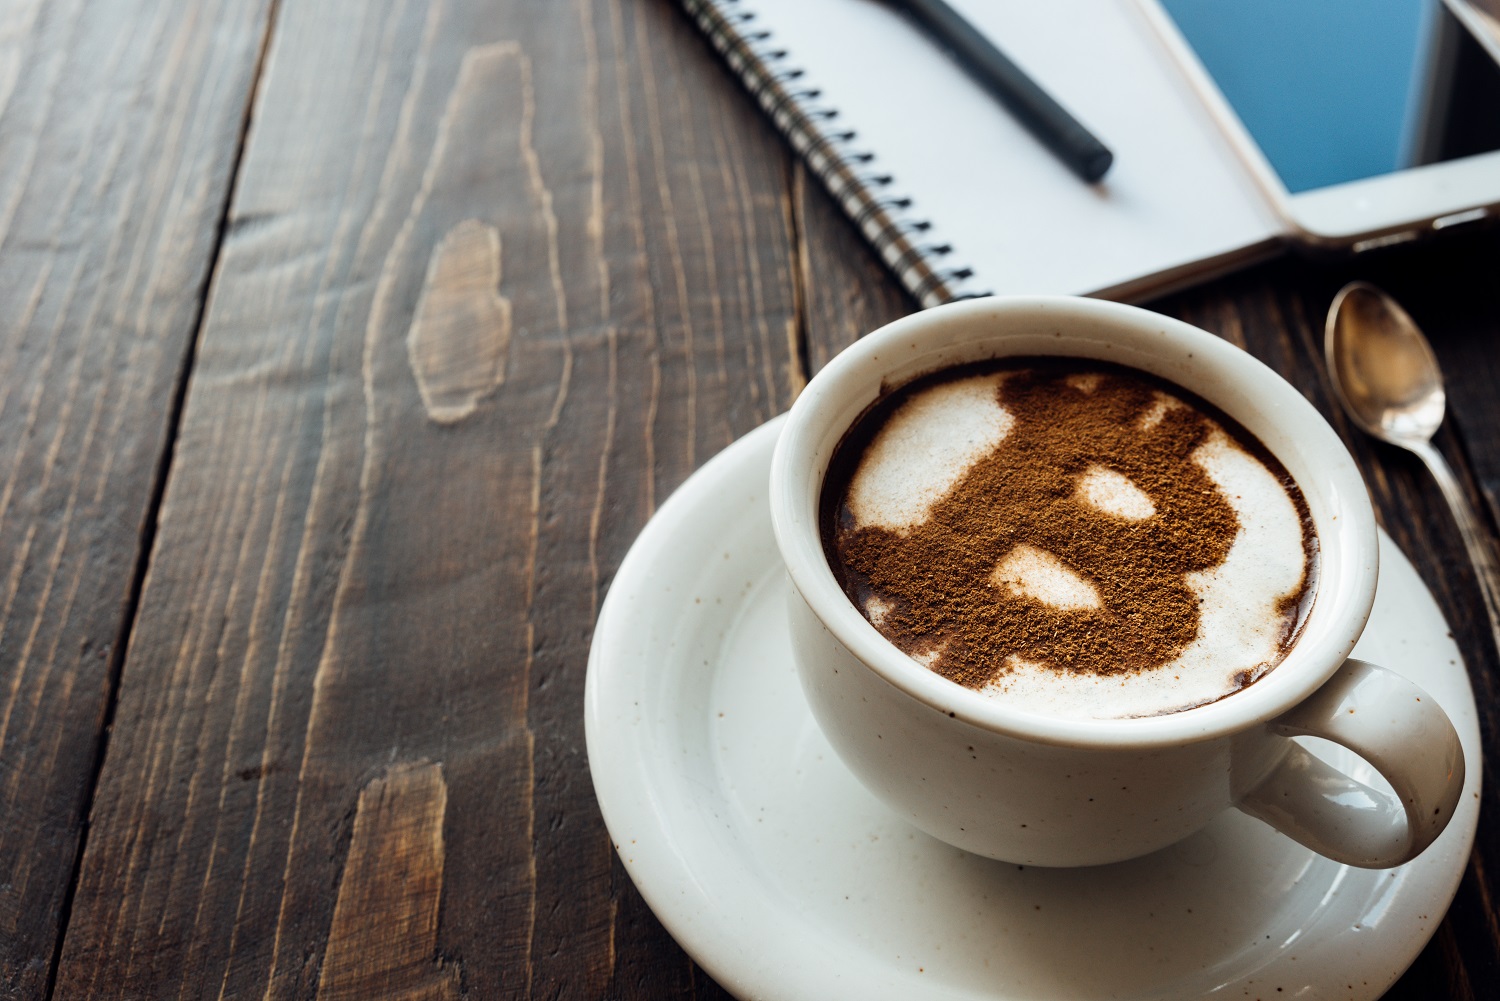 'COFFEE COIN' IS A CRYPTOCURRENCY WITH COFFEE AS THE ASSET -